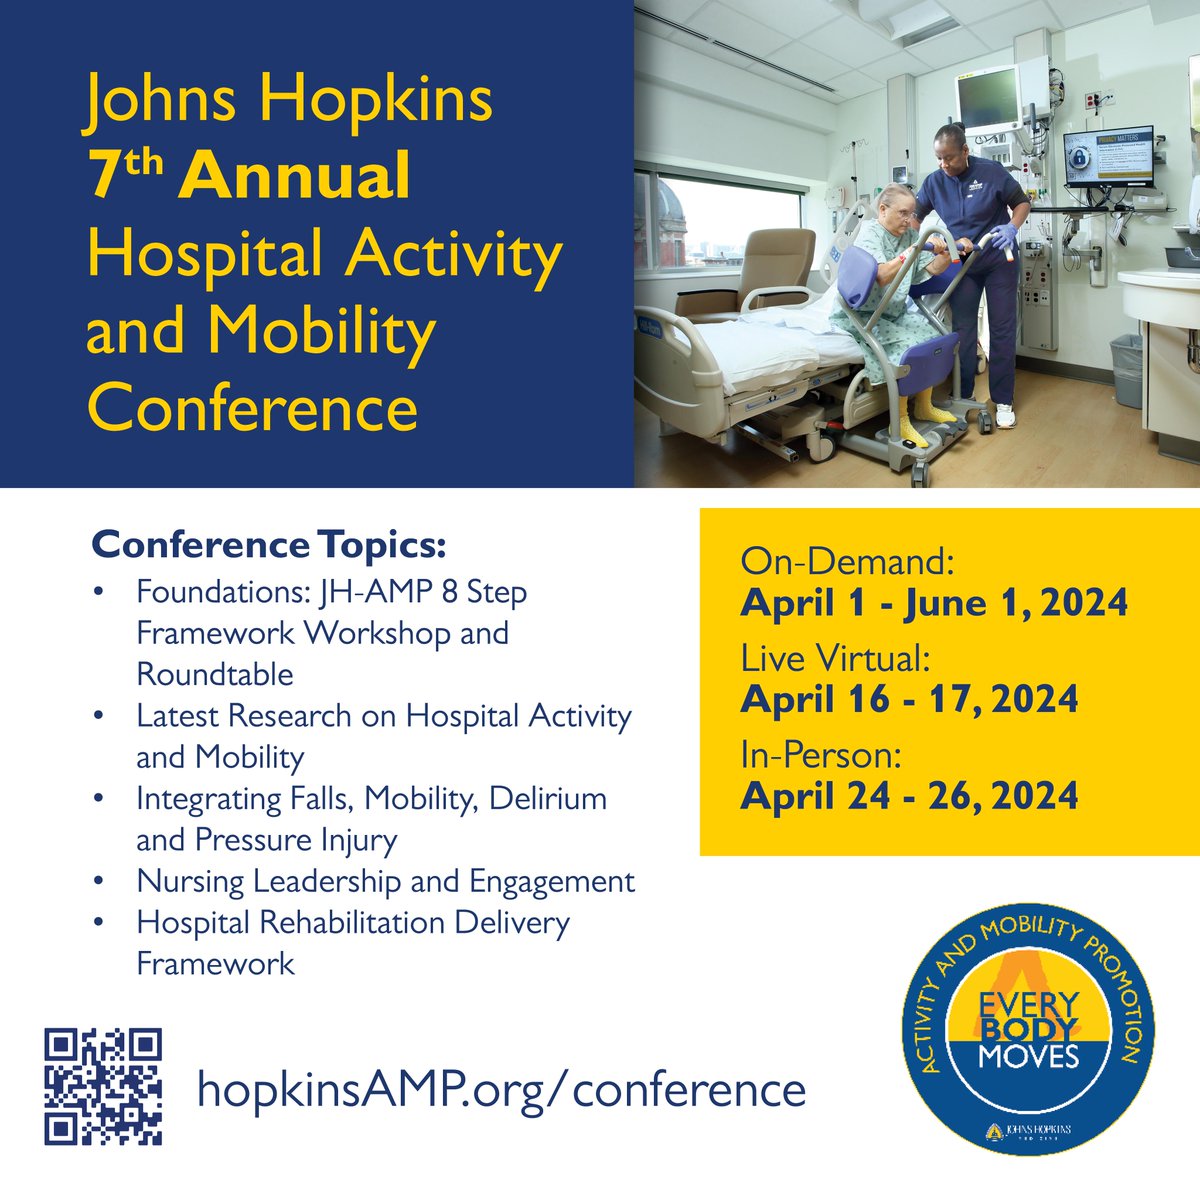 Registration for the 7th Annual Hospital Activity and Mobility Conference ends in one week! Register now and join a community of experts from around the world making #PatientMobility a priority. bit.ly/3vEGkL7 #icurehab #fallprevention #acutecare #pressureinjuries